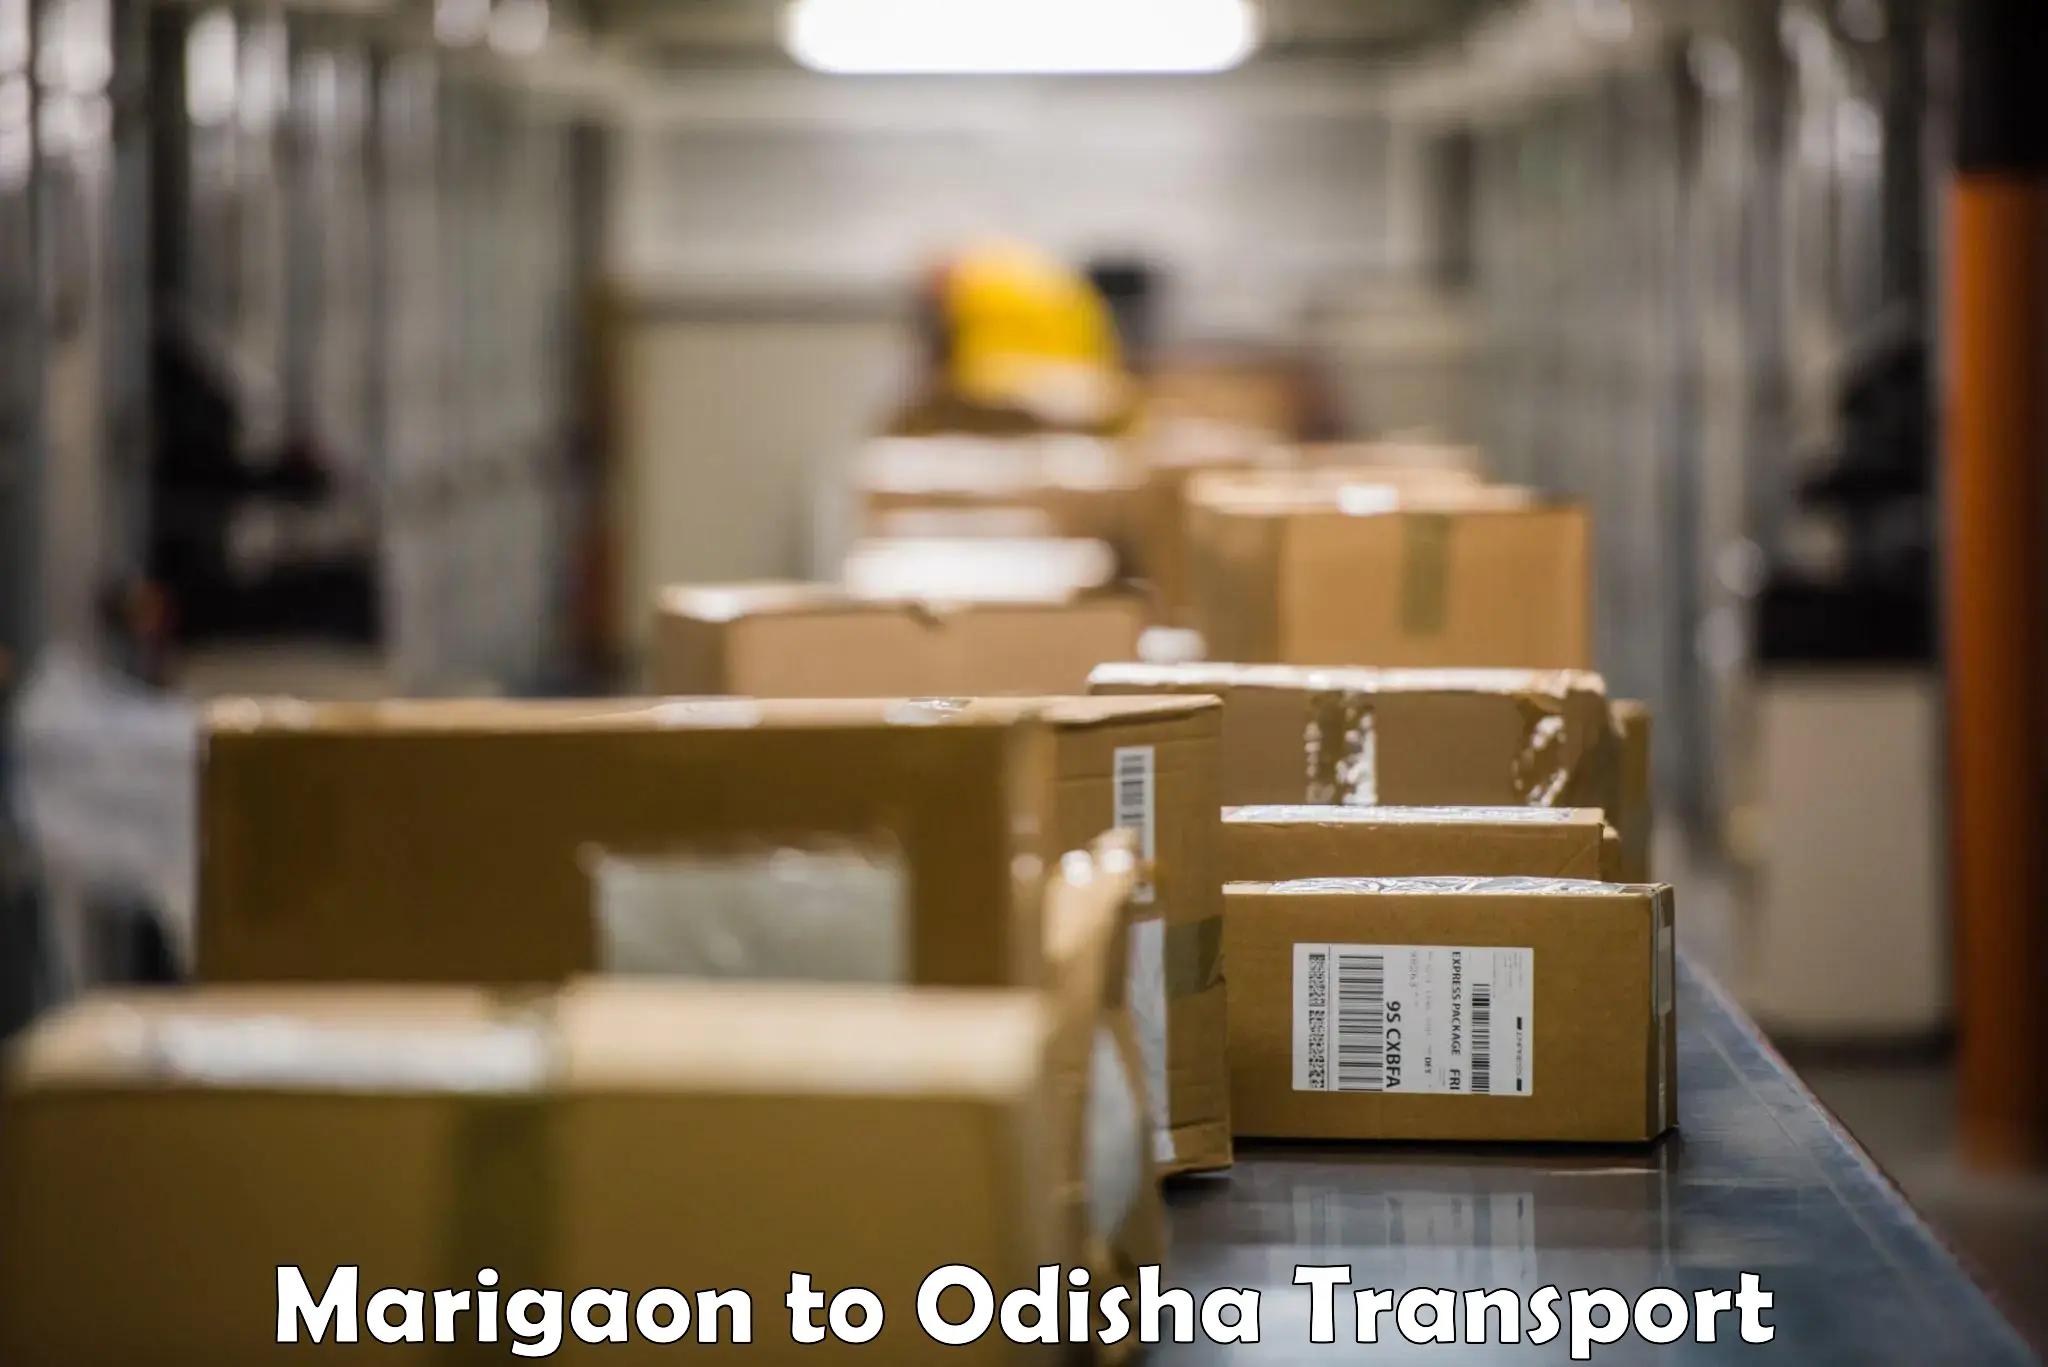 Goods transport services in Marigaon to Raruan